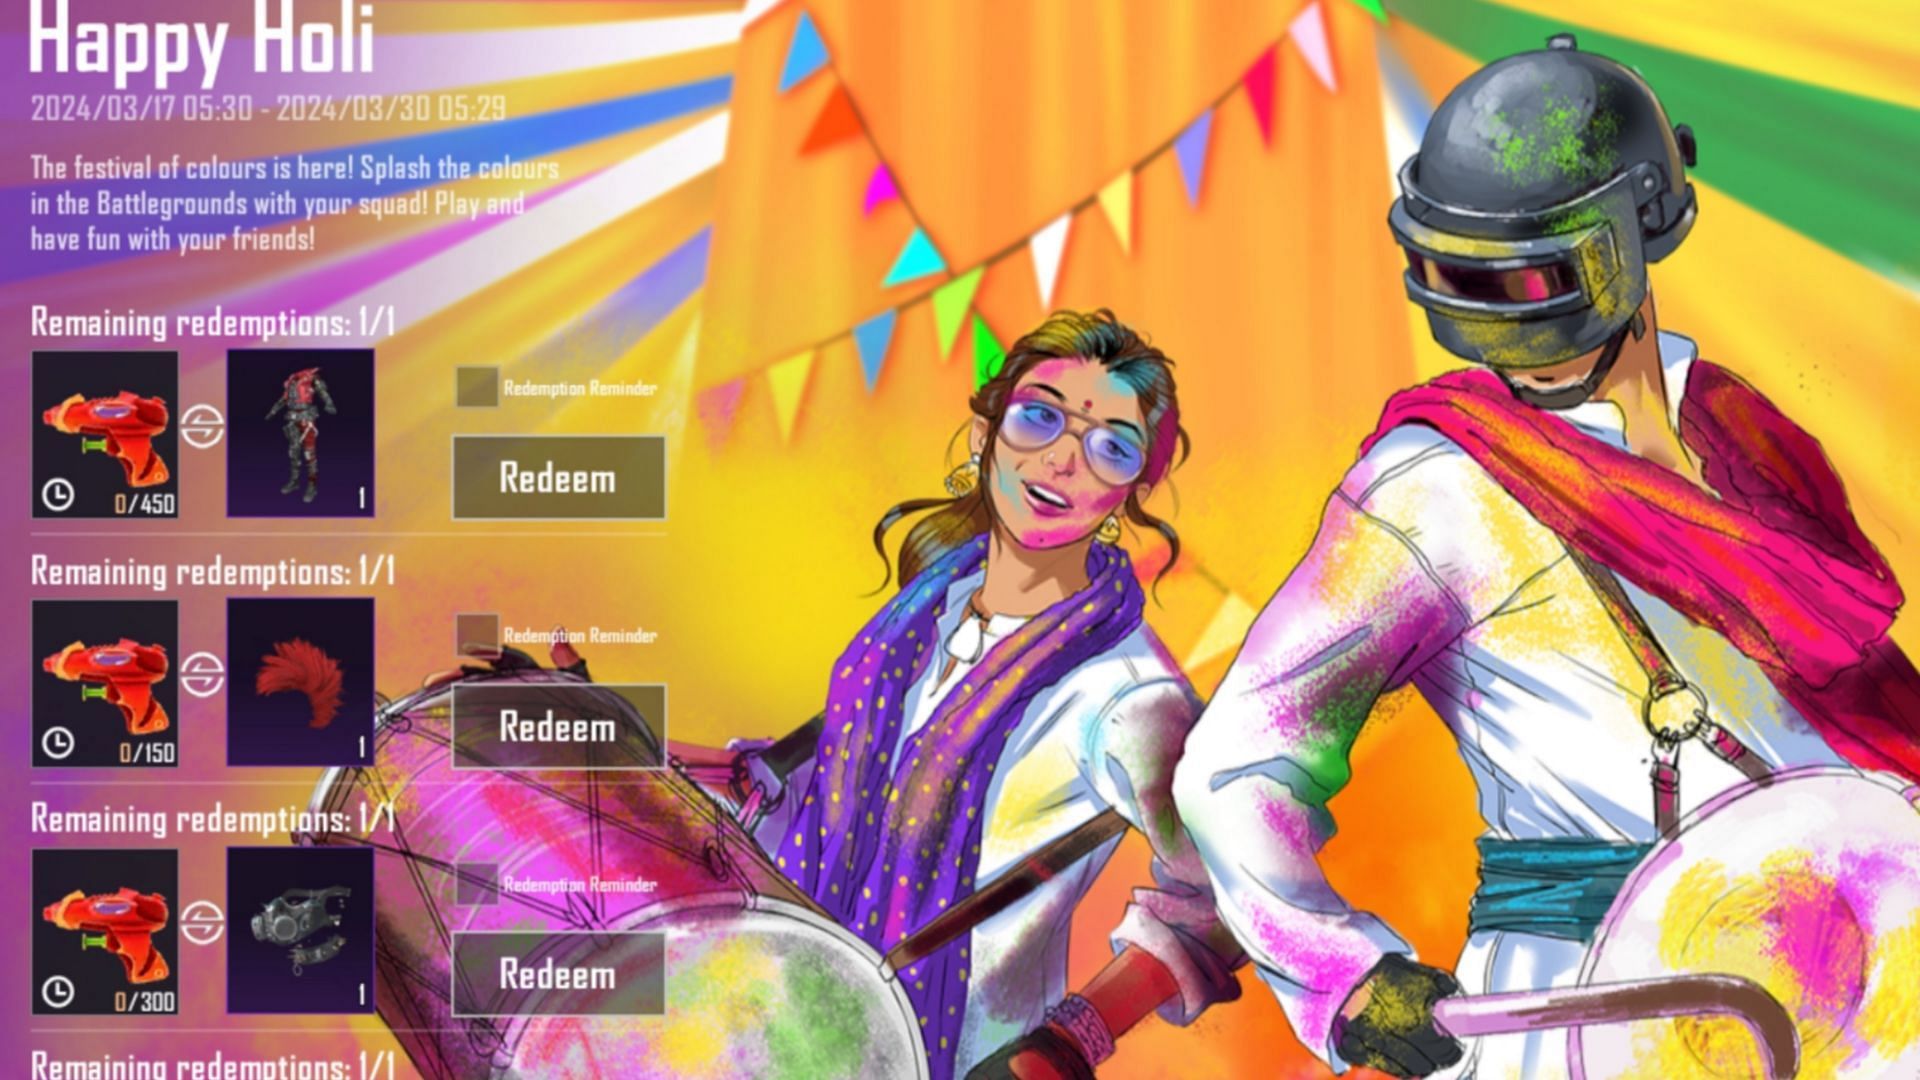 Snippet showing rewards offered in the Happy Holi event in BGMI (Image via Krafton)